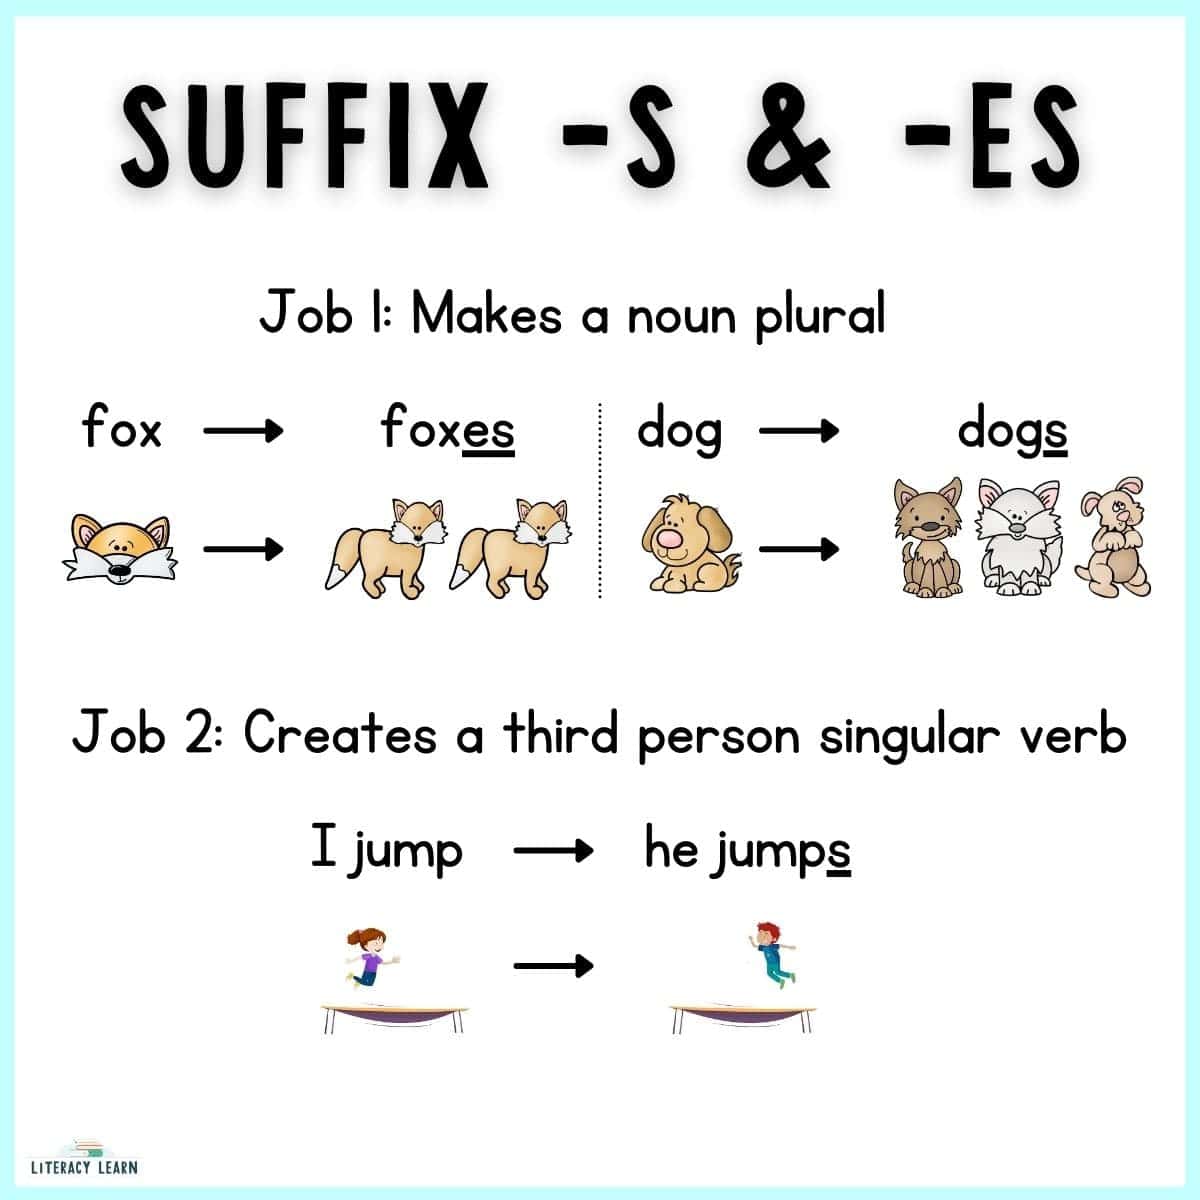 Graphic entitled "Suffix -s and -es" with jobs, examples, and pictrues.